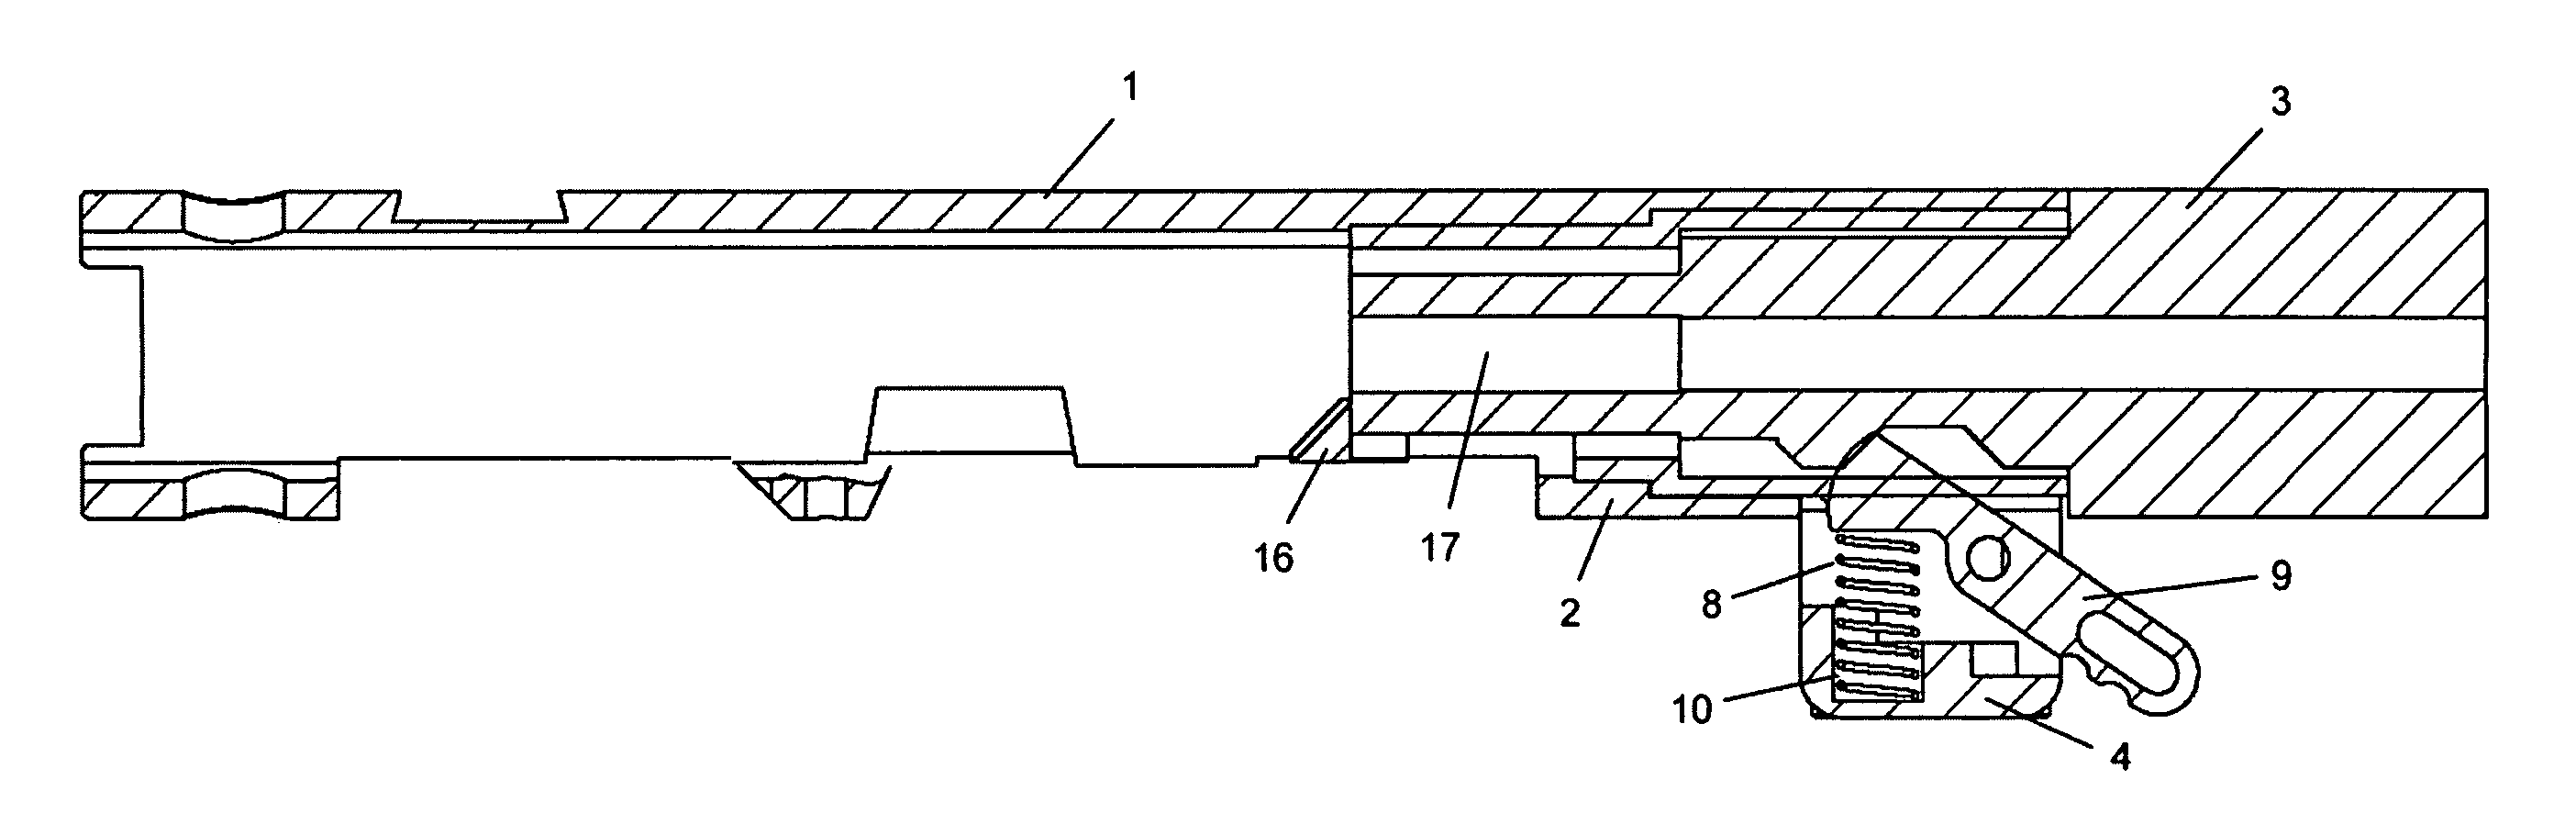 Firearm with a detachable barrel and suppressed barrel assembly